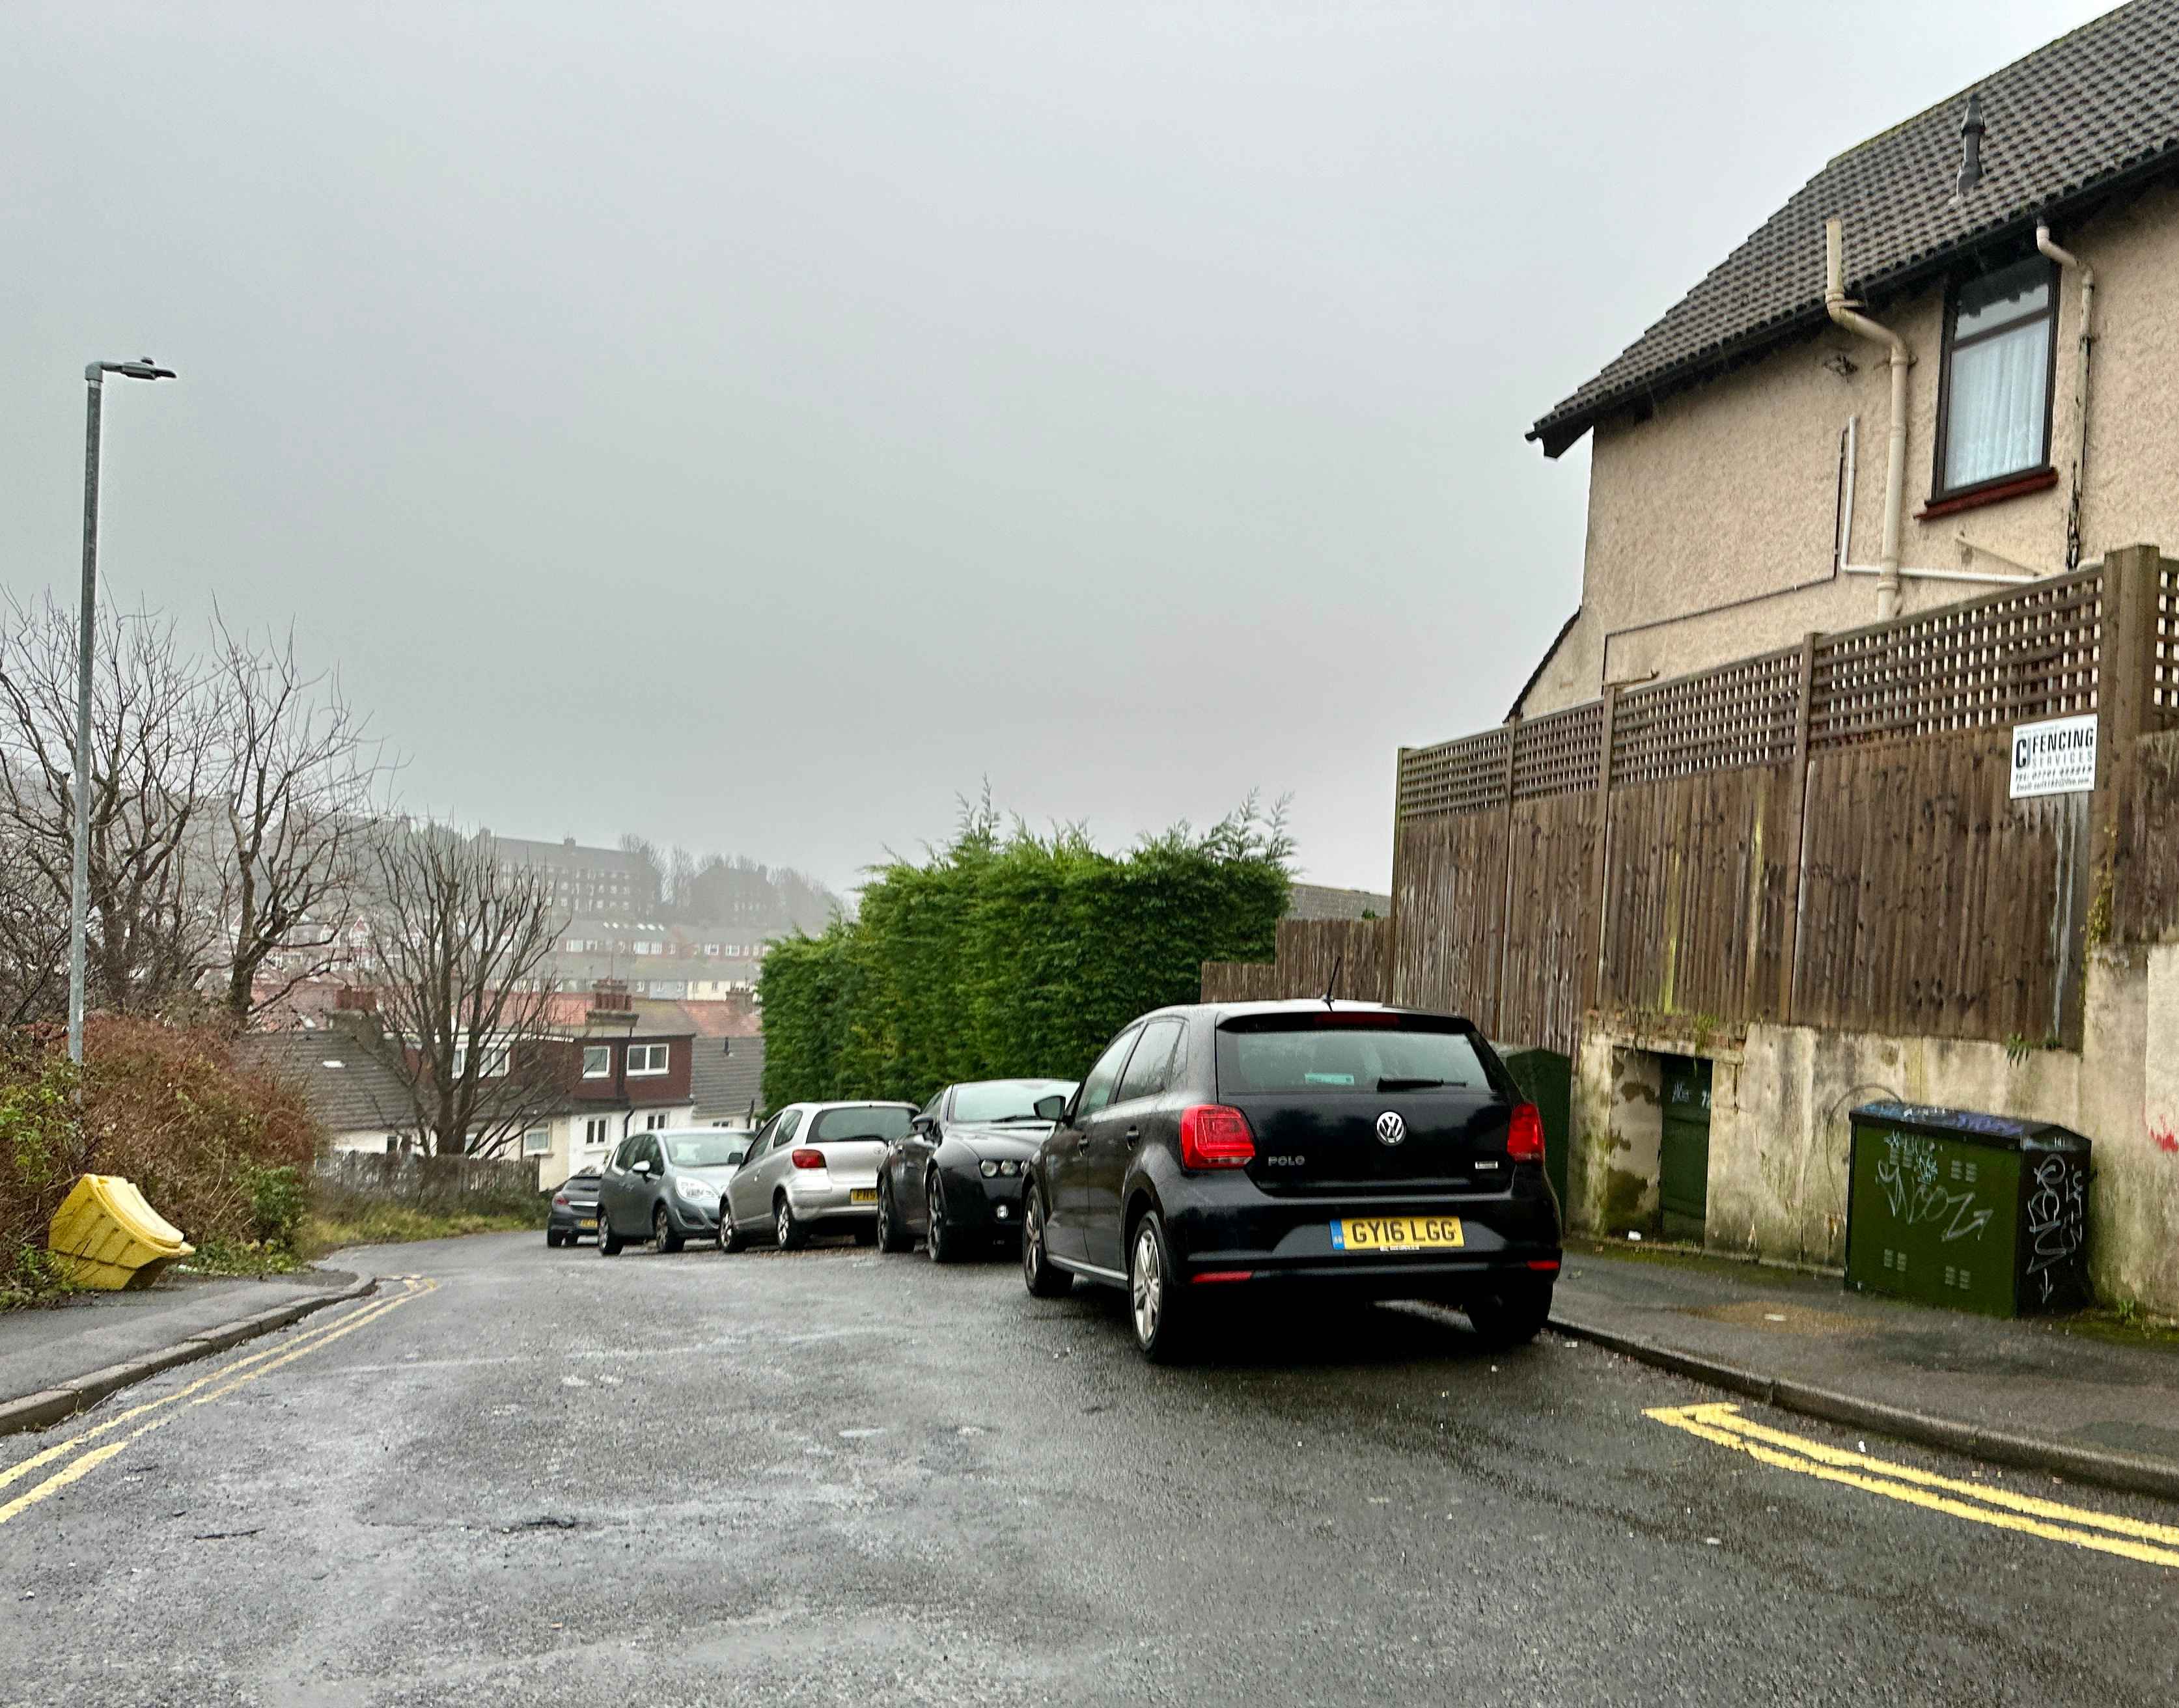 Photograph of GY16 LGG - a Black Volkswagen Polo parked in Hollingdean by a non-resident. The fourth of five photographs supplied by the residents of Hollingdean.